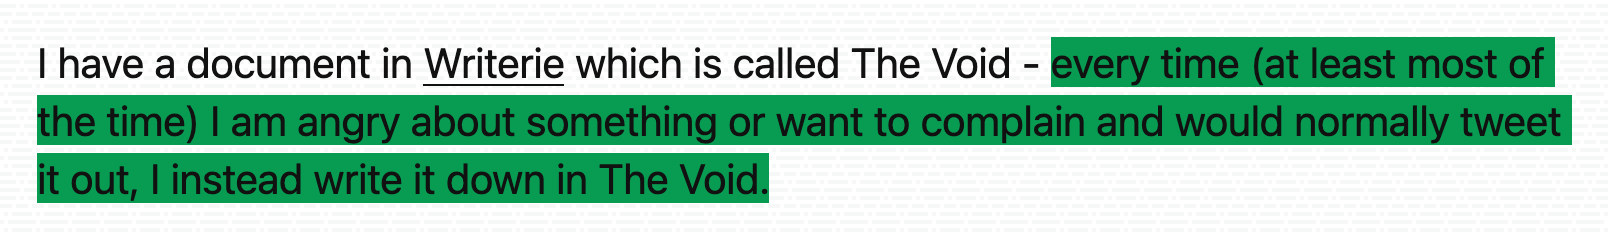 I have a document in Writerie which is called The Void - every time (at least most of the time) I am angry about something or want to complain and would normally tweet it out, I instead write it down in The Void.